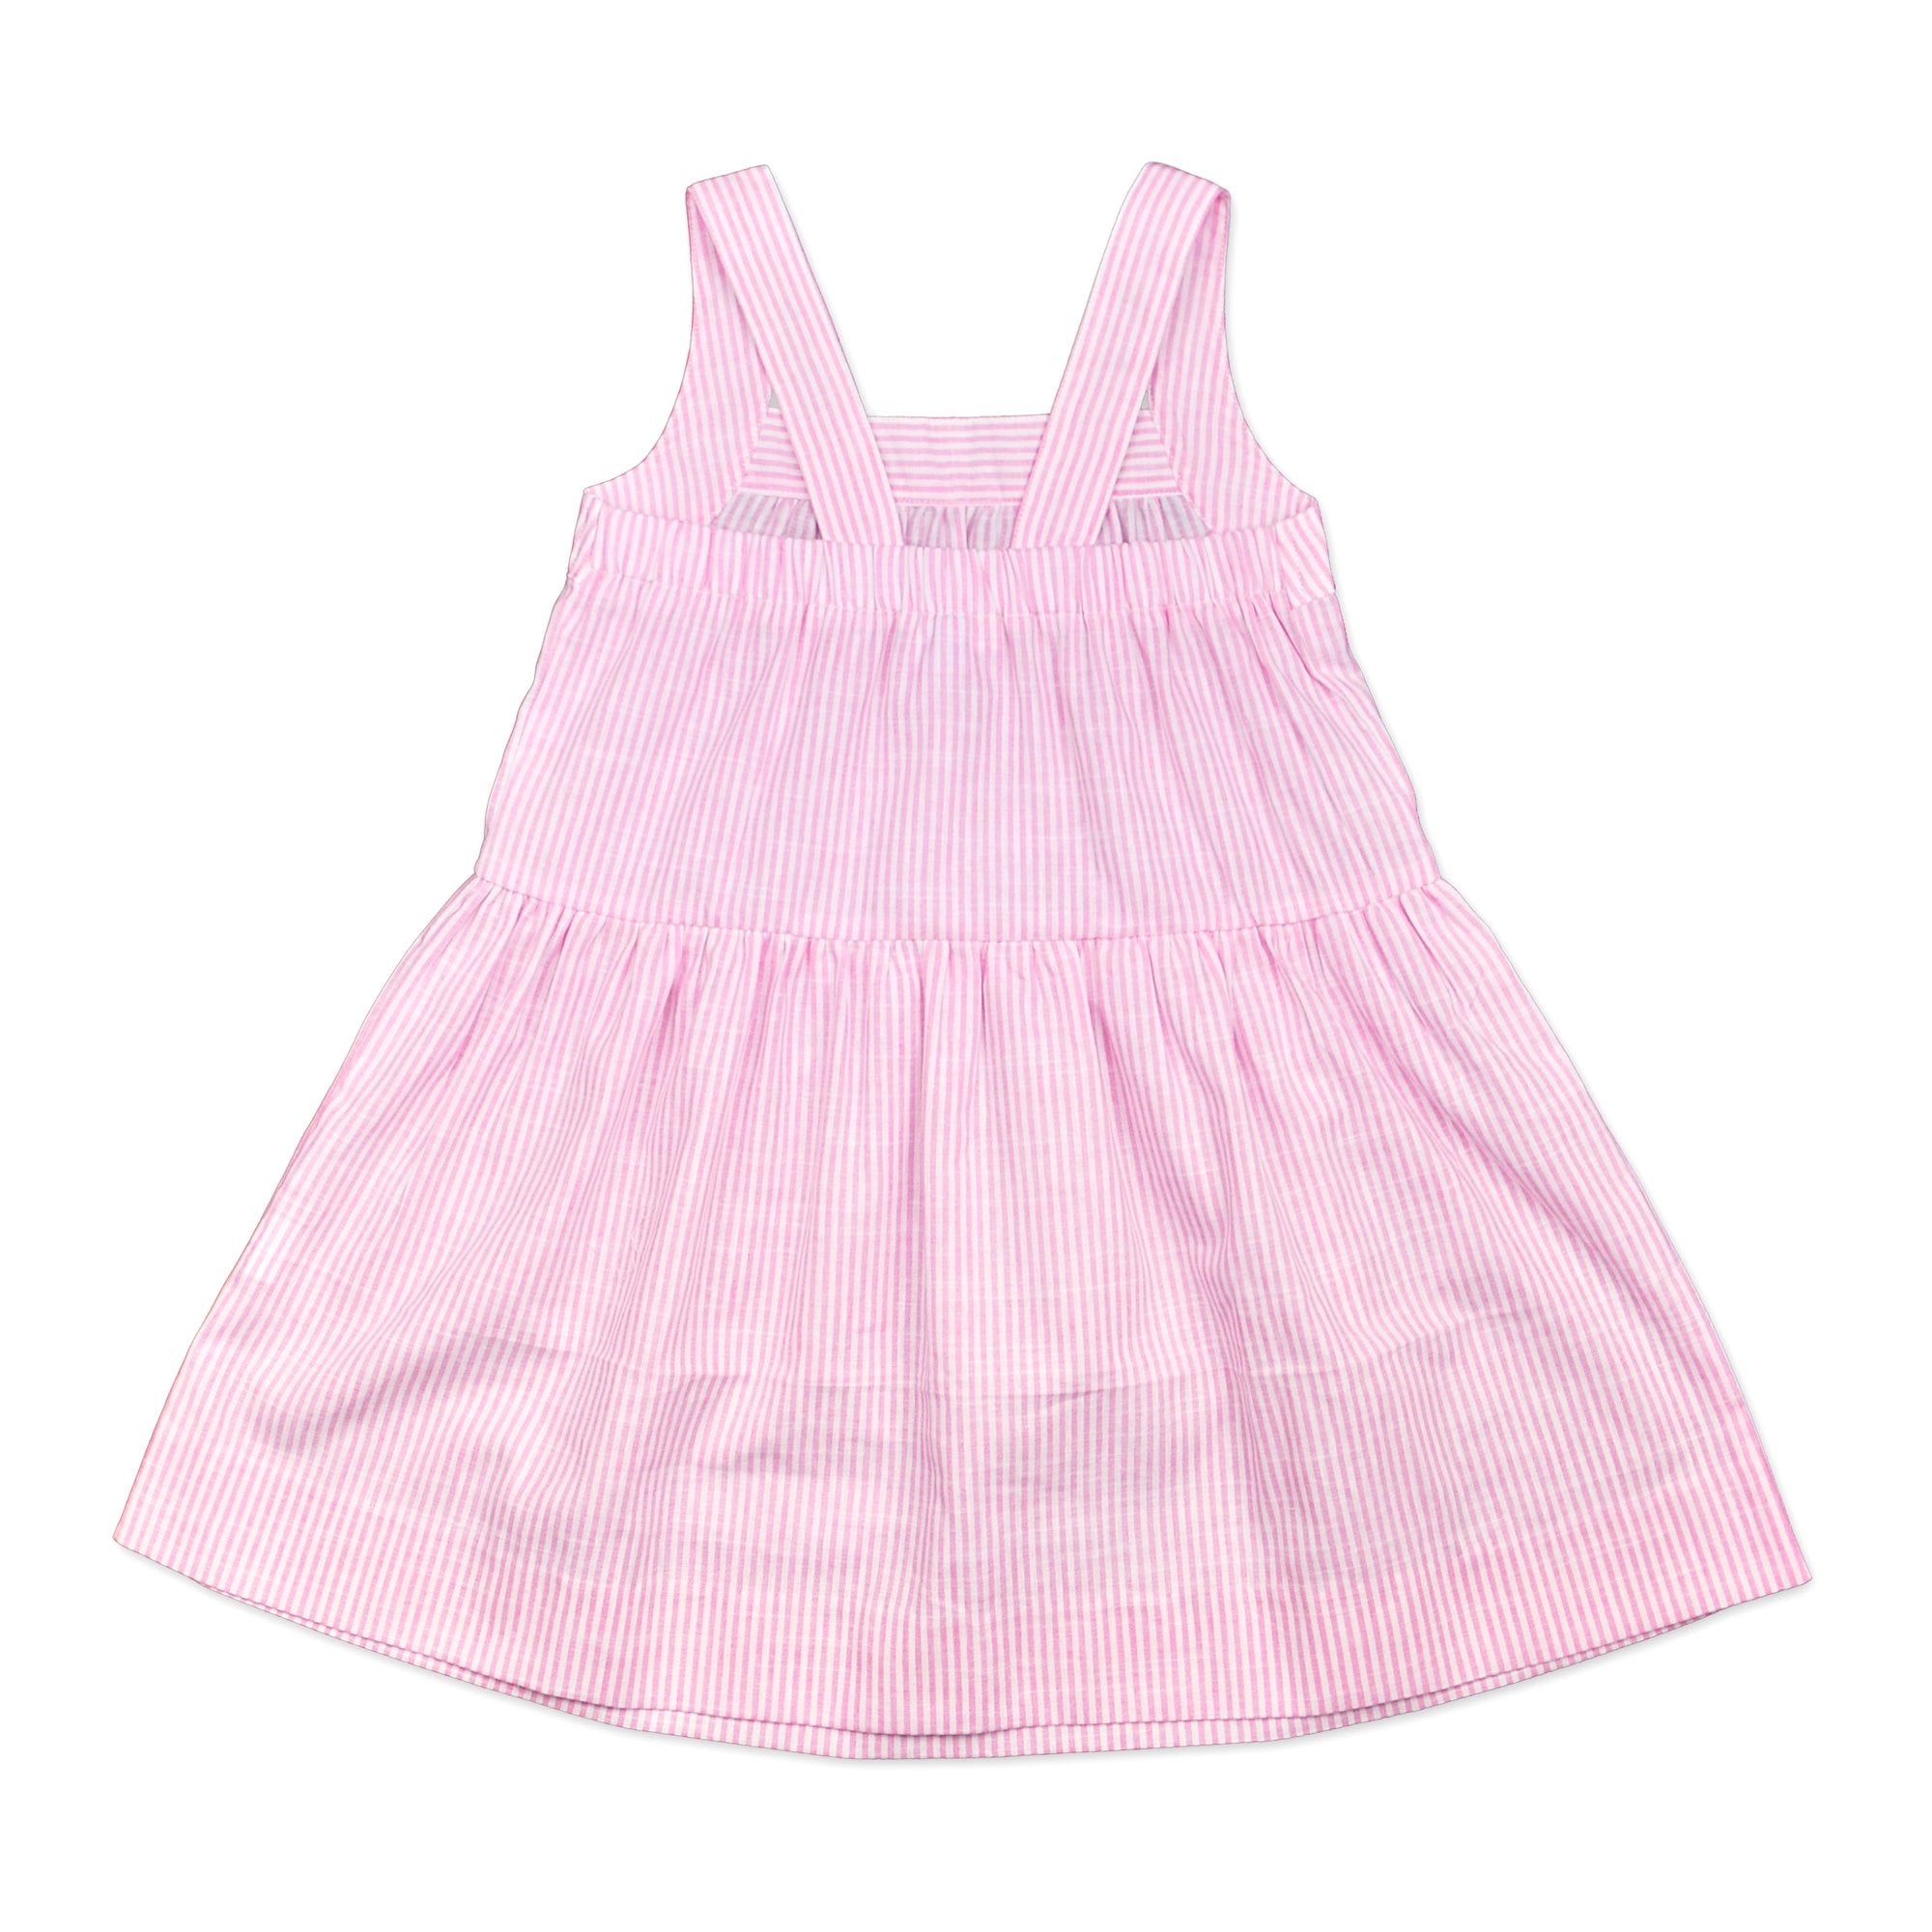 Camilla Dress In Pale Pink And White Stripe - Cou Cou Baby